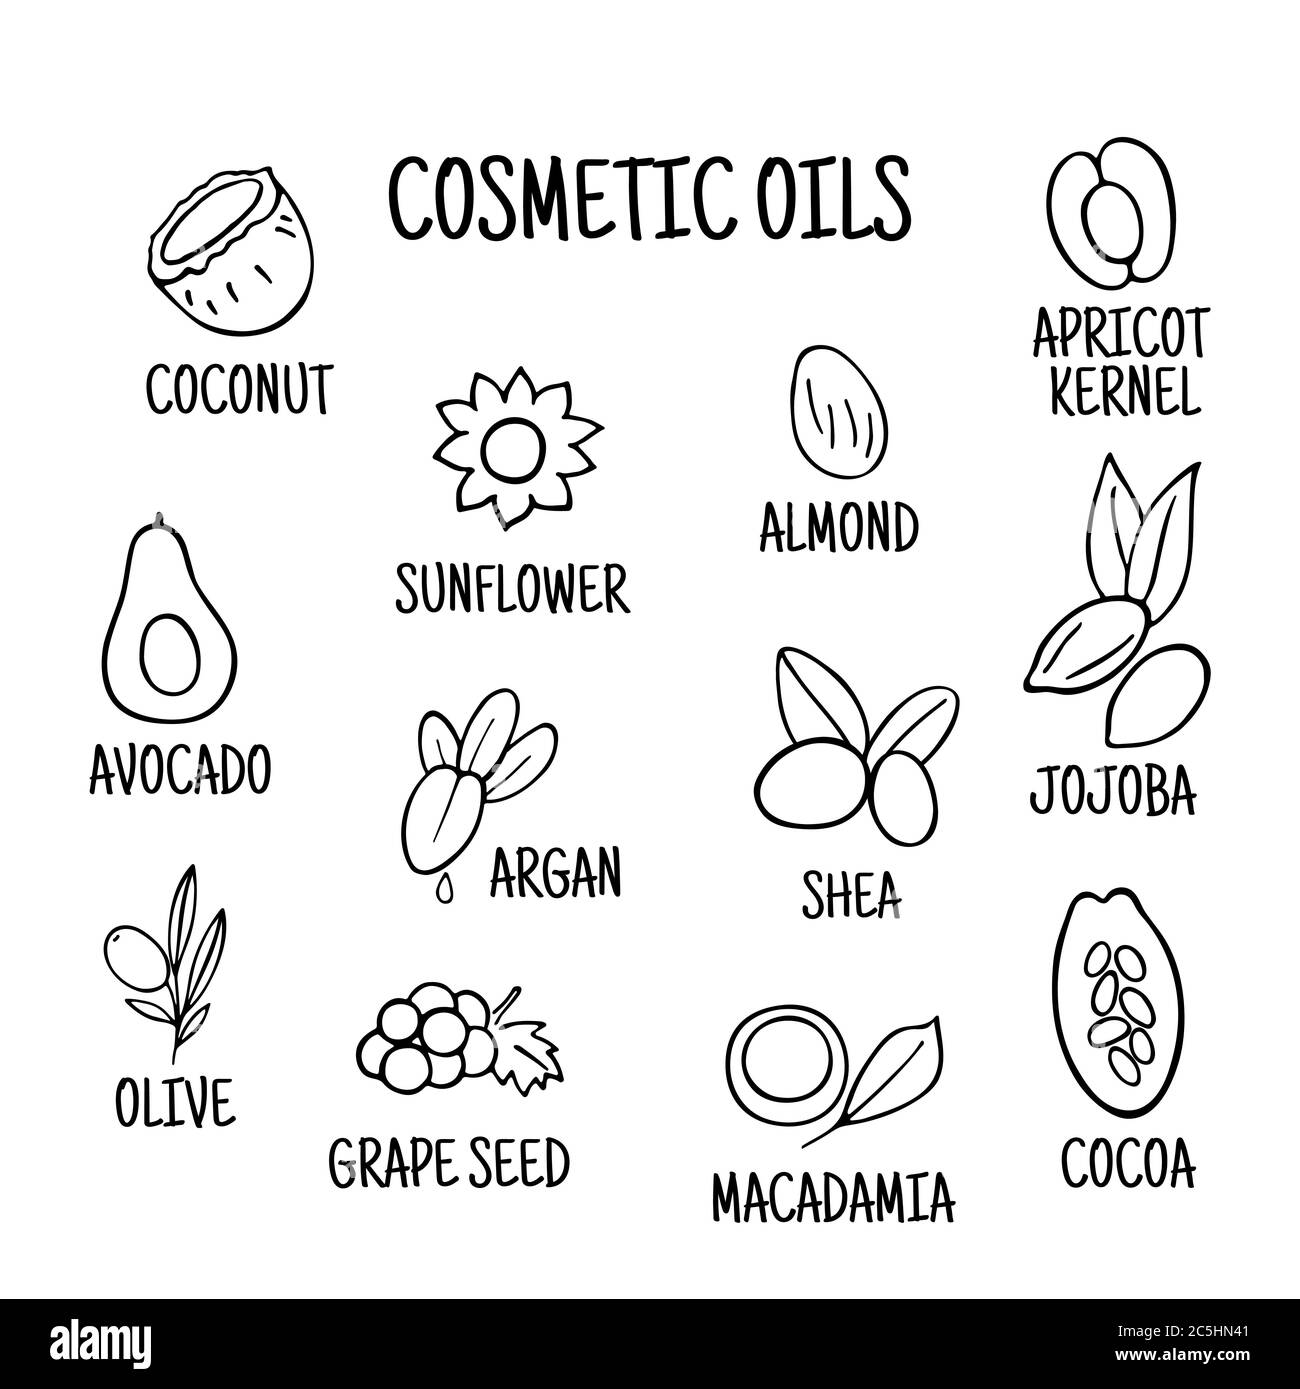 Cosmetic oils. Nuts from which squeeze oils. Nourishing oils for skin beauty. Vector icons Stock Vector